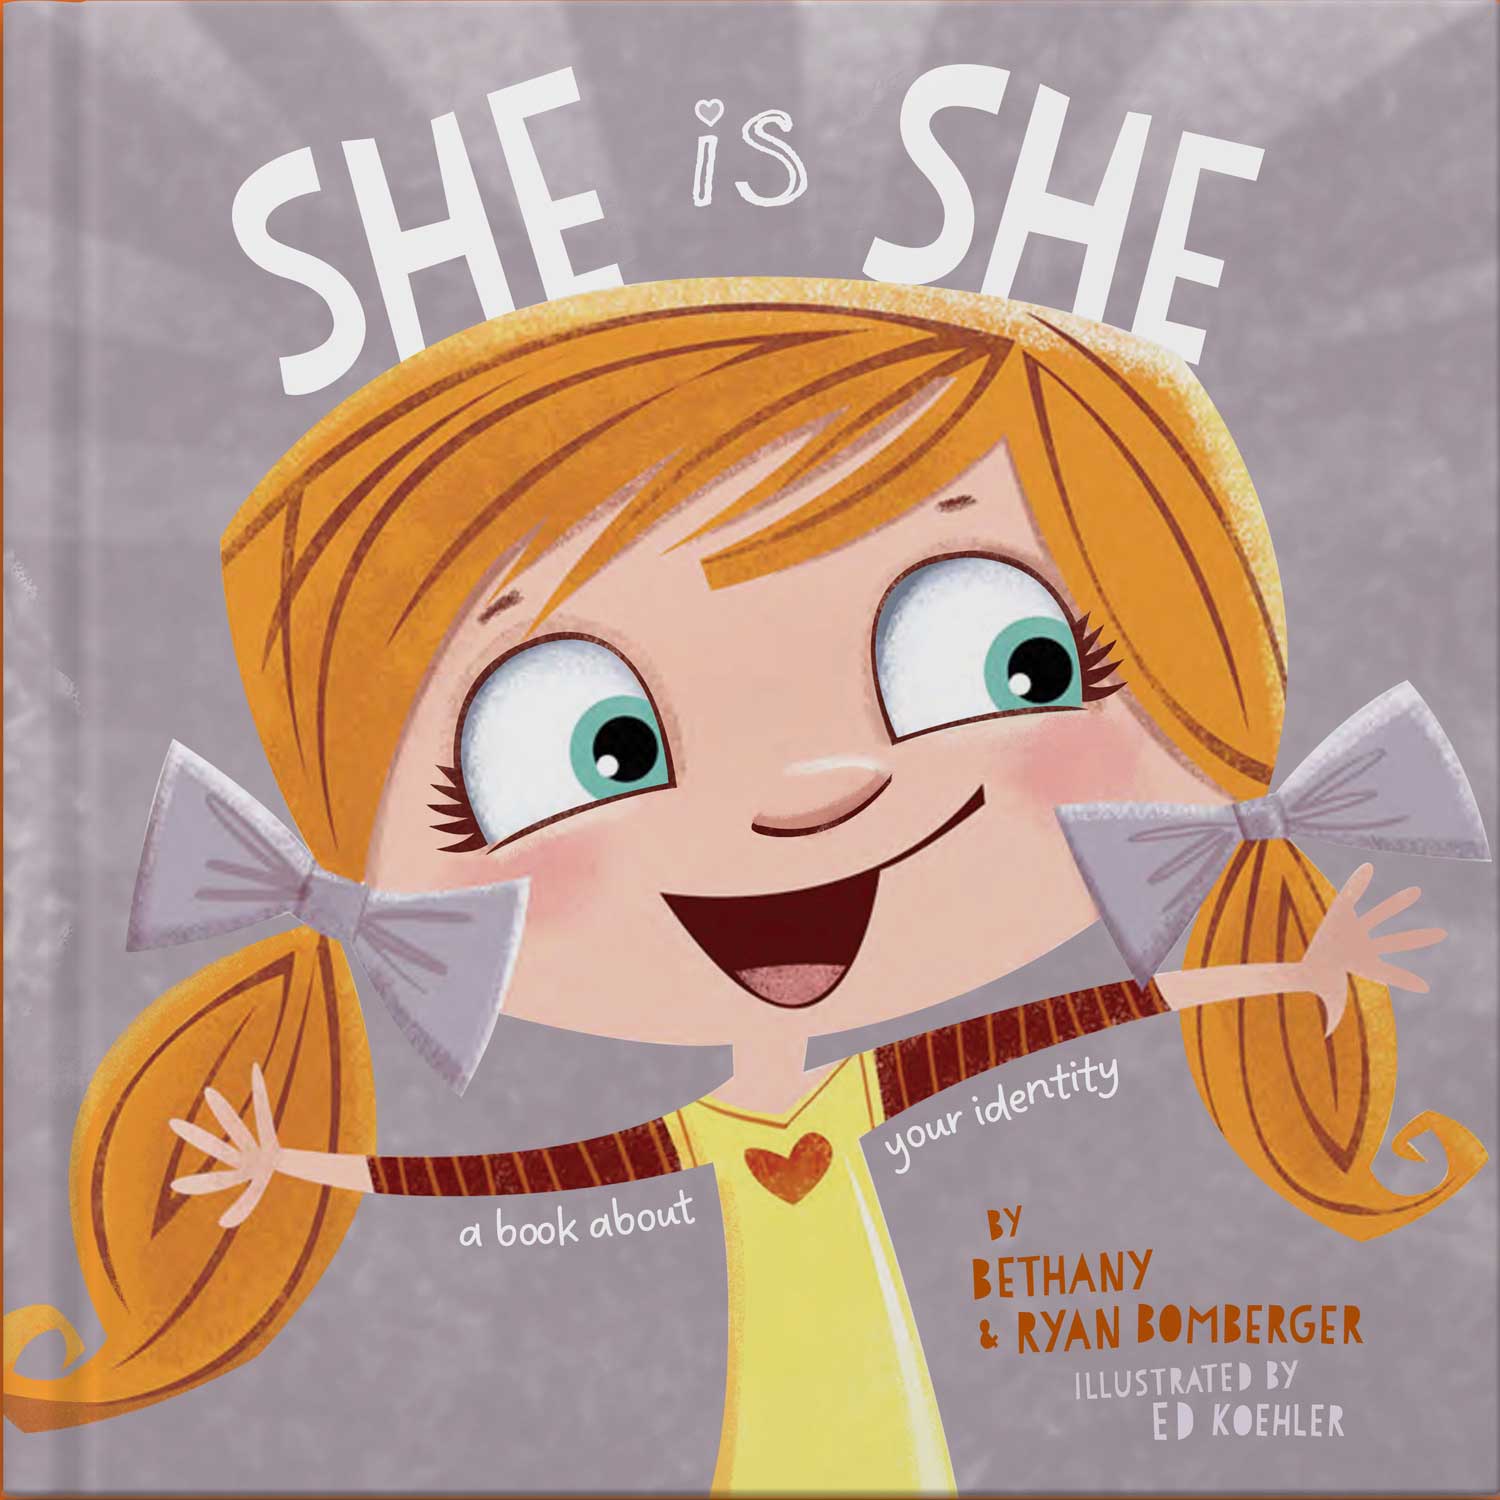 "She is She" by Bethany and Ryan Bomberger